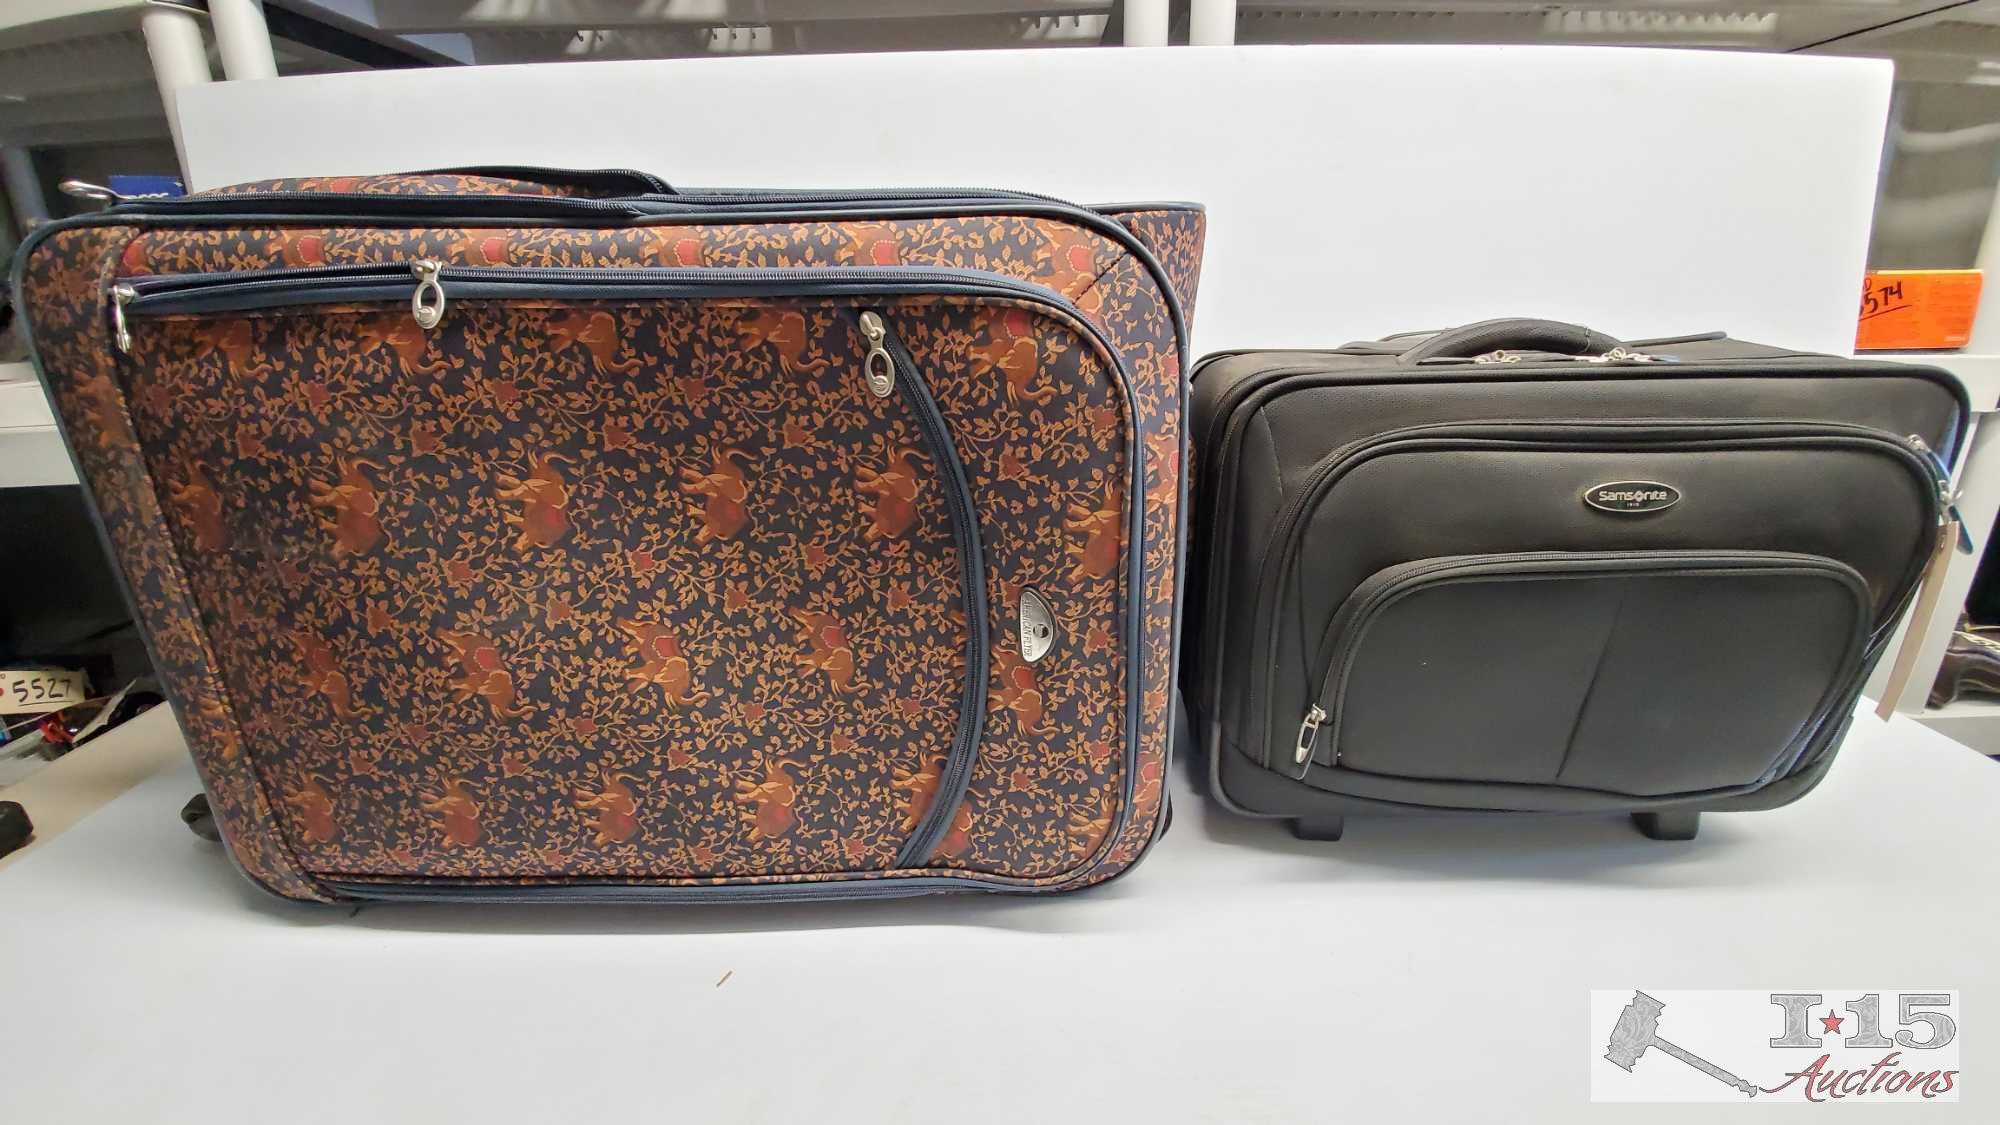 American Flyer Luggage Case